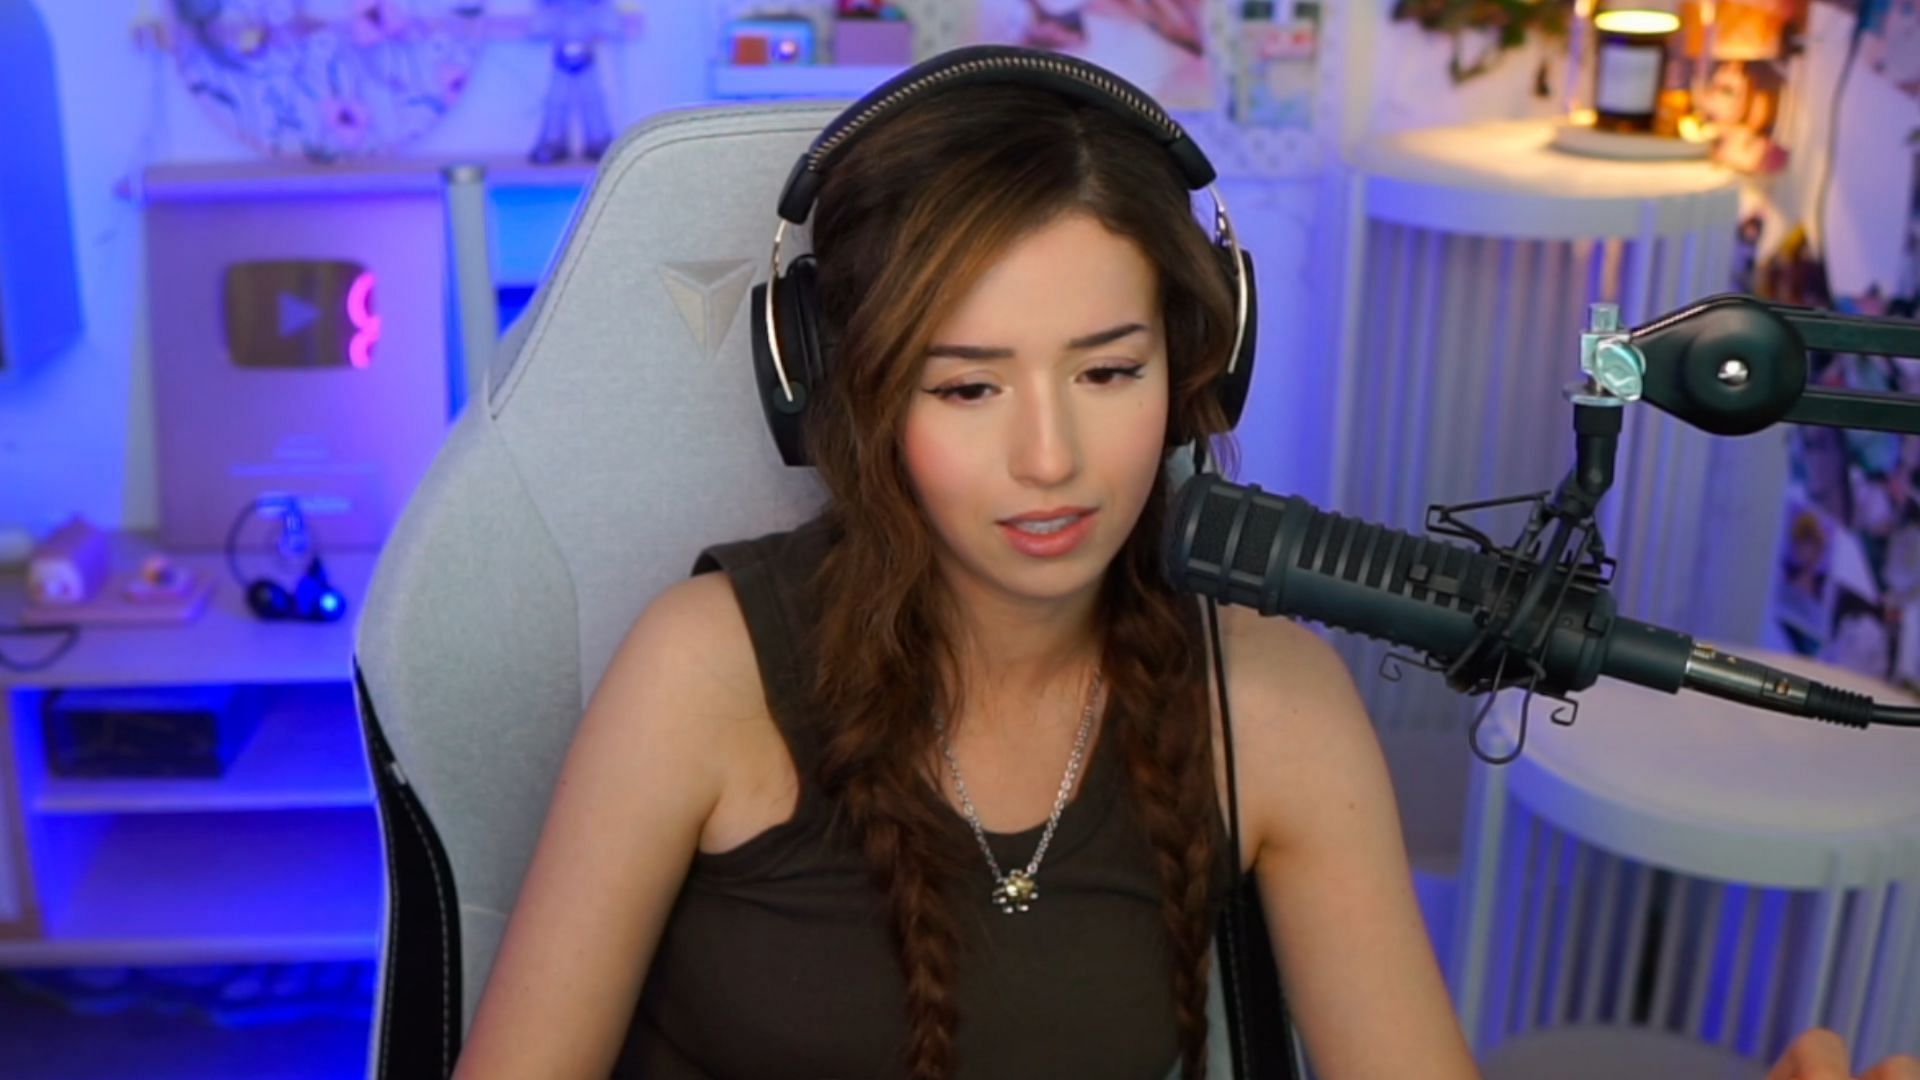 This is Cyberbullying!: Pokimane learns how Slither.io works the